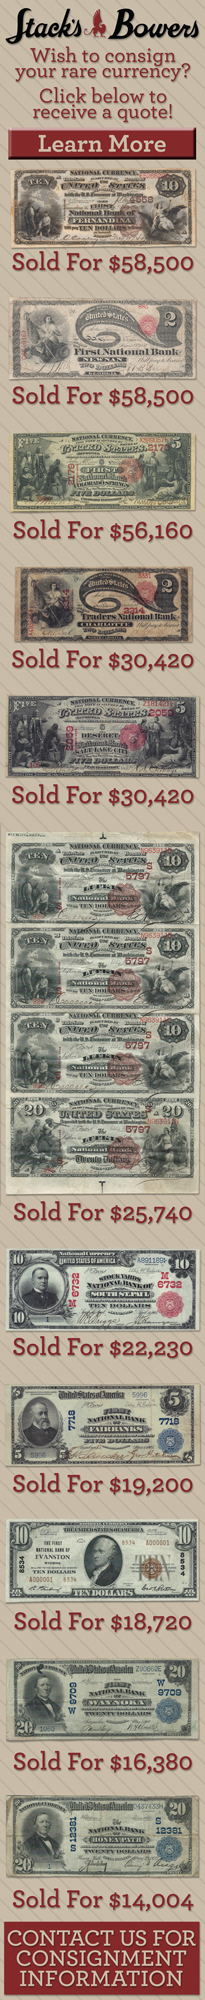 Banknote-Banner-Auctions